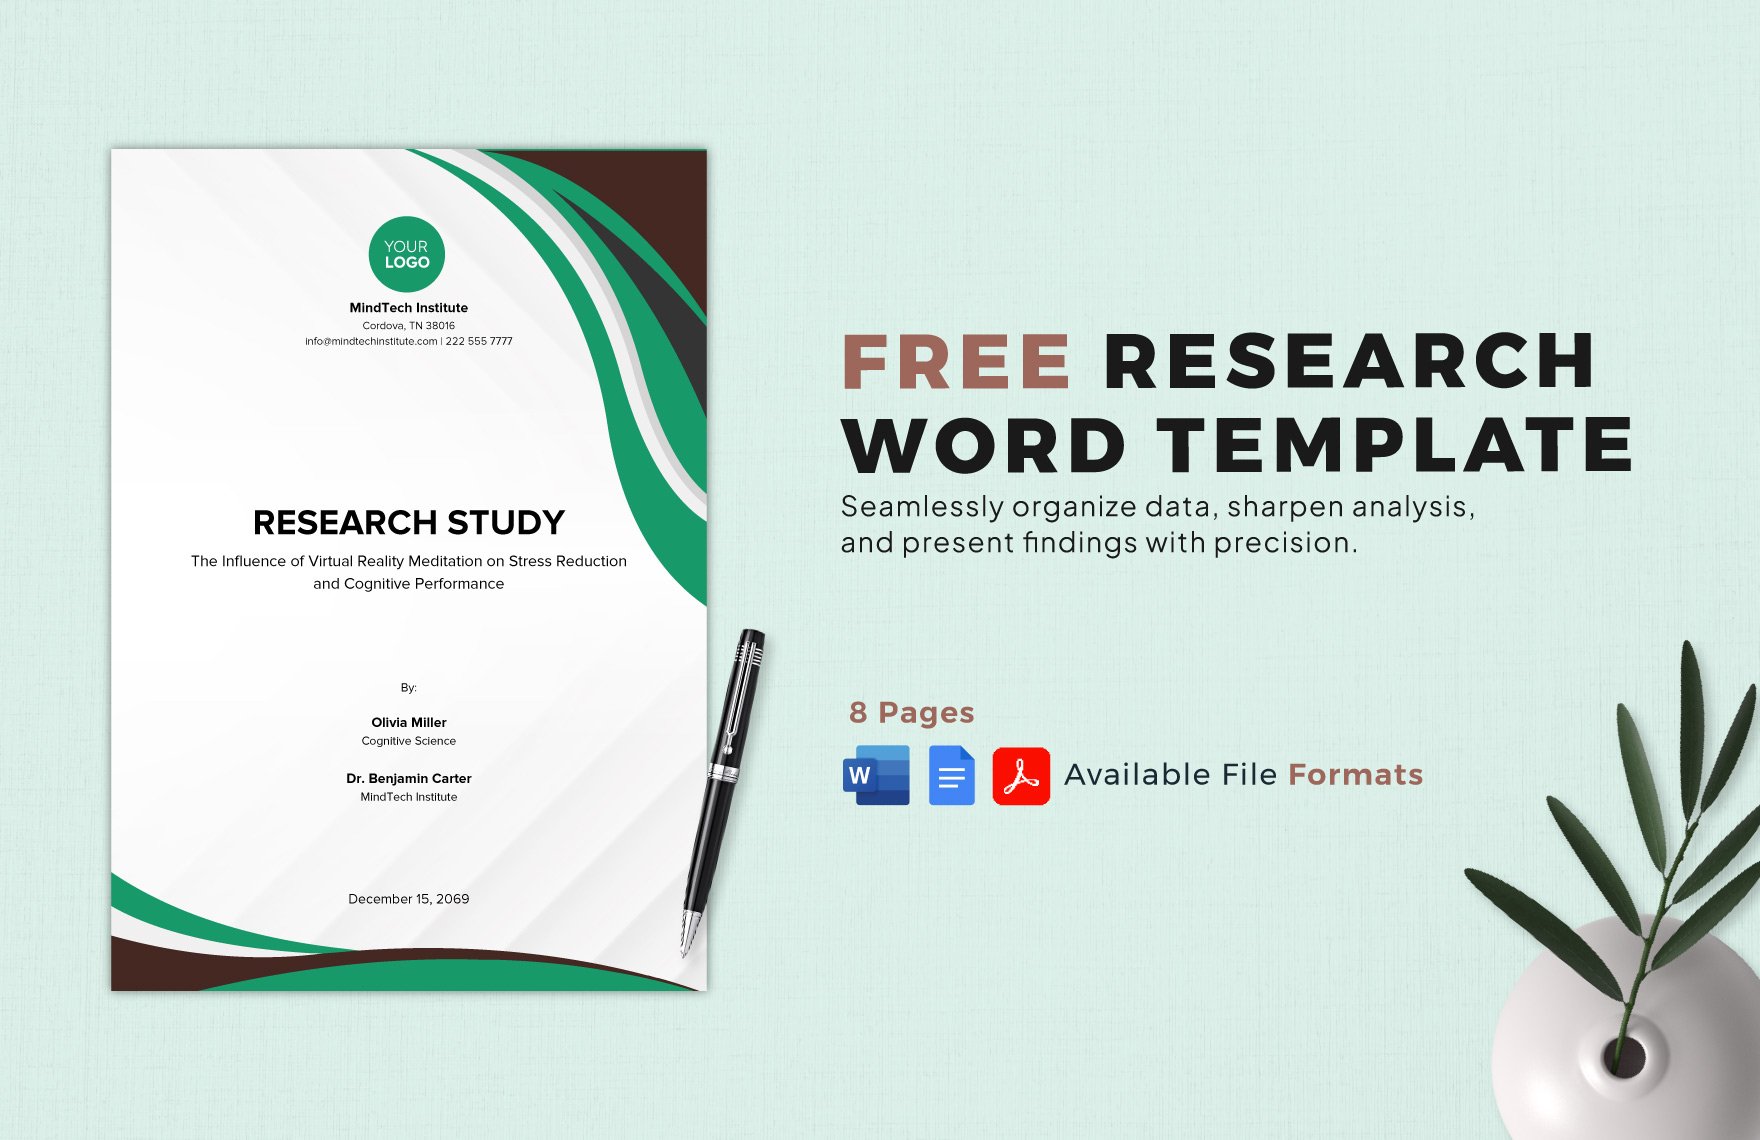 Free Research Word Template in Word, Google Docs, PDF